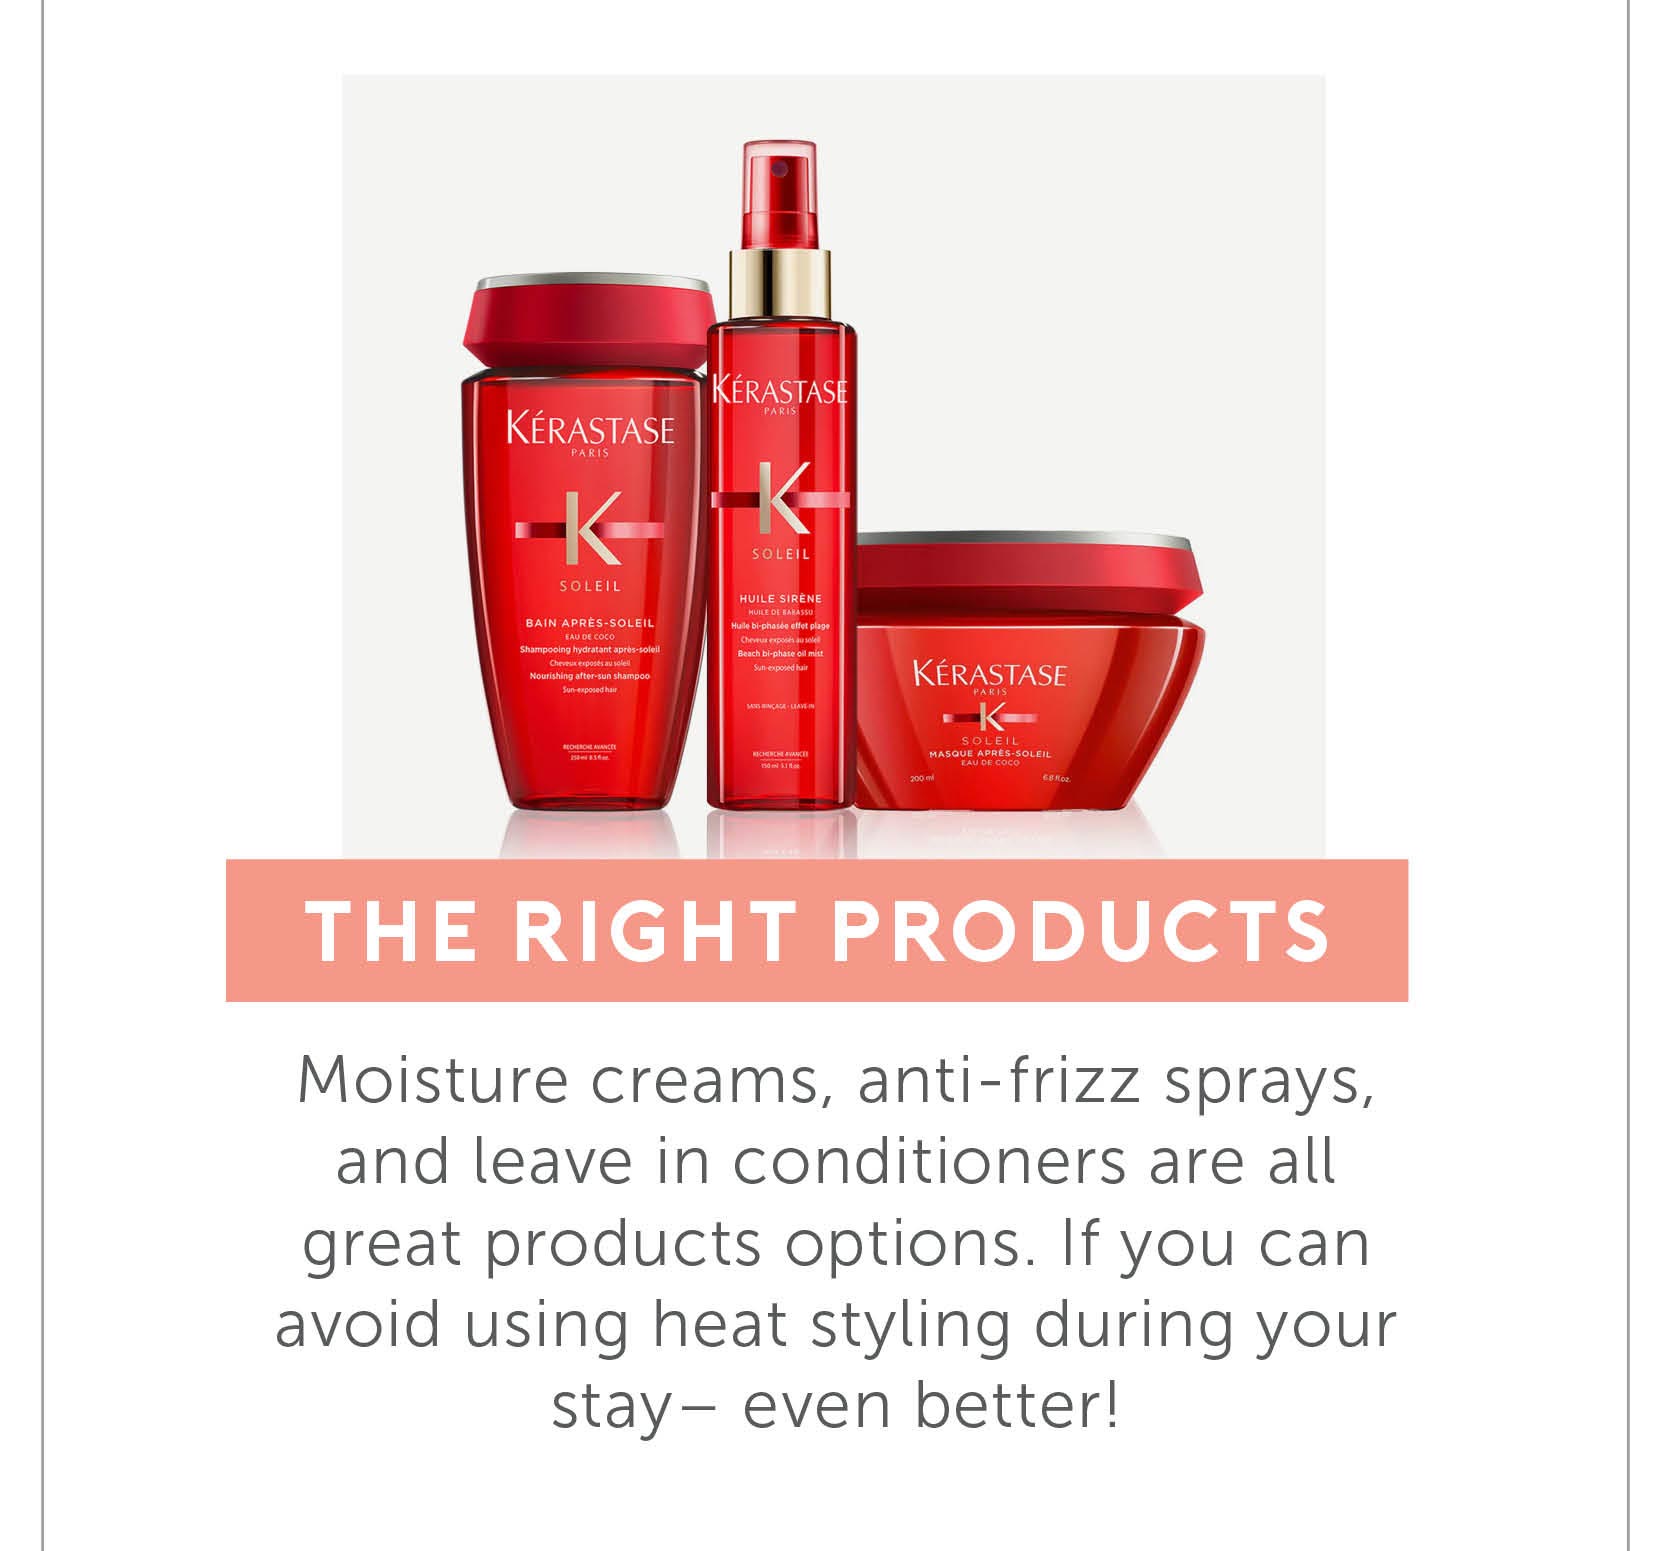 Choose the right products - Moisture creams, anti-frizz sprays, and leave in conditioners are all great products options. If you can avoid using heat styling during your stay- even better! 